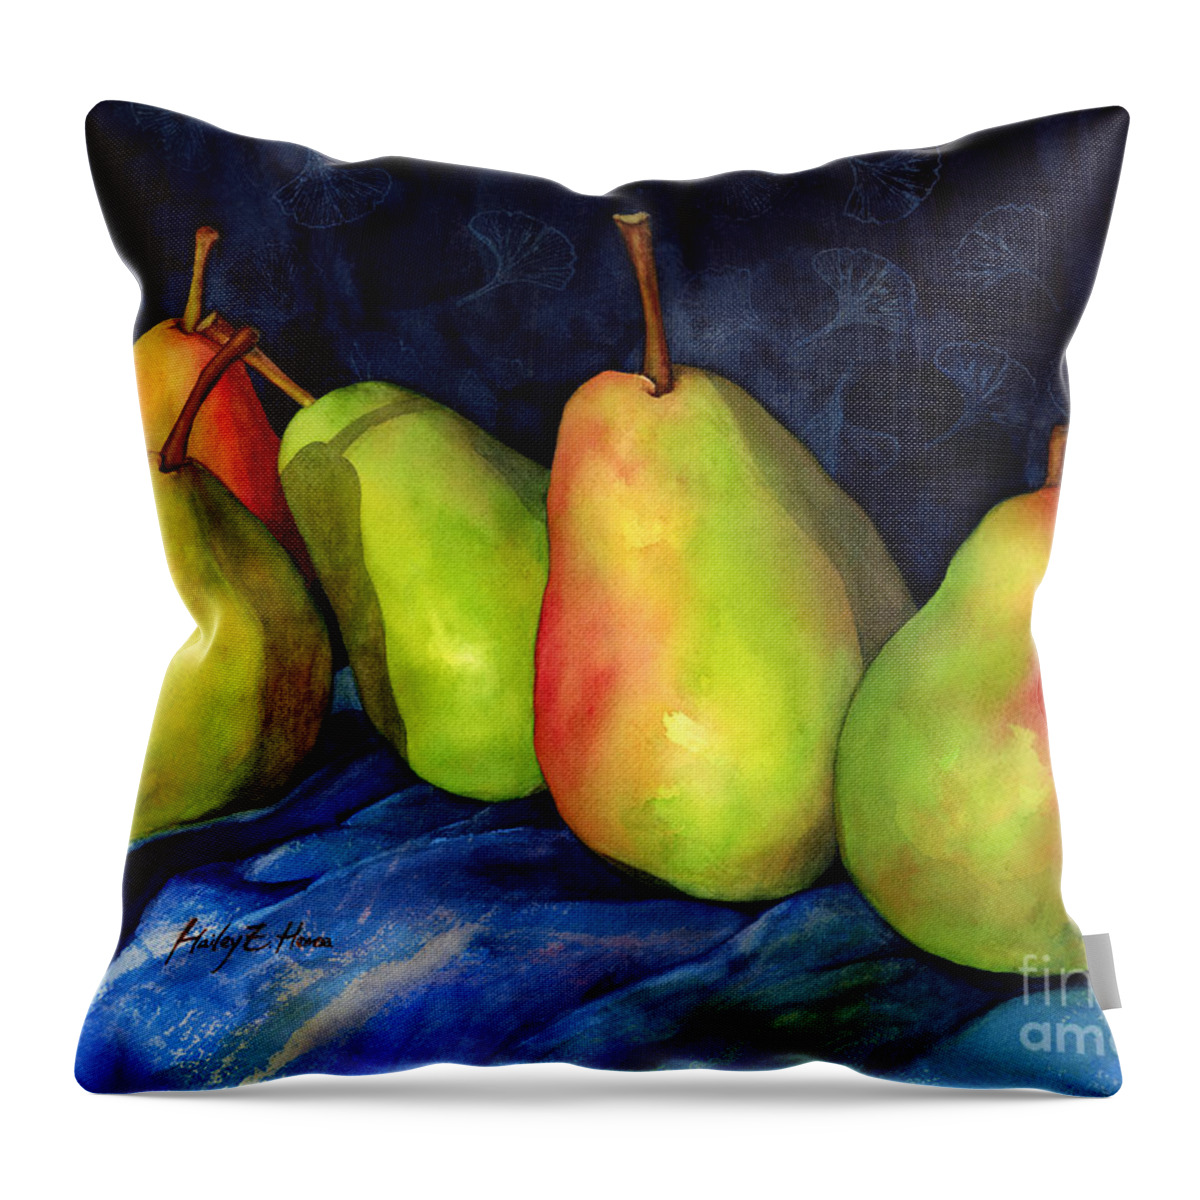 Pear Throw Pillow featuring the painting Green Pears by Hailey E Herrera